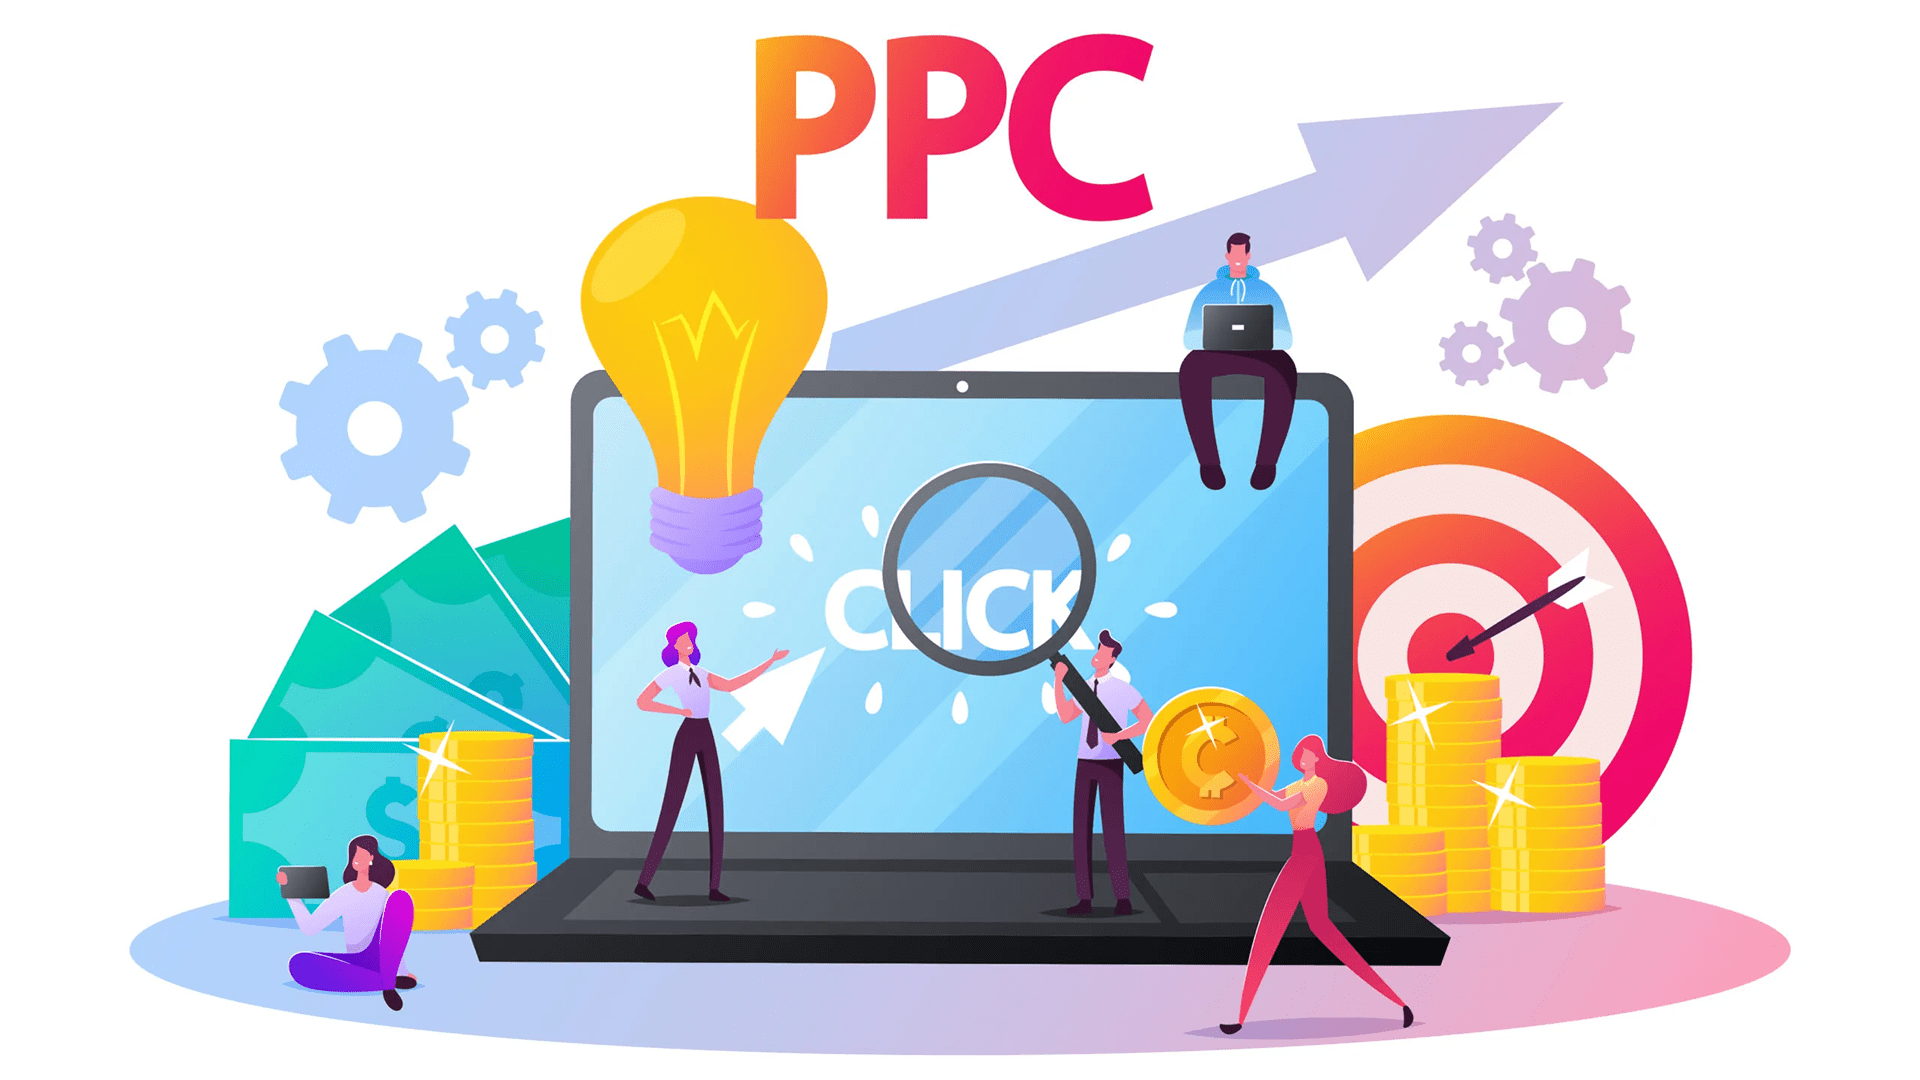 Pay per click (PPC) updates for September 2019